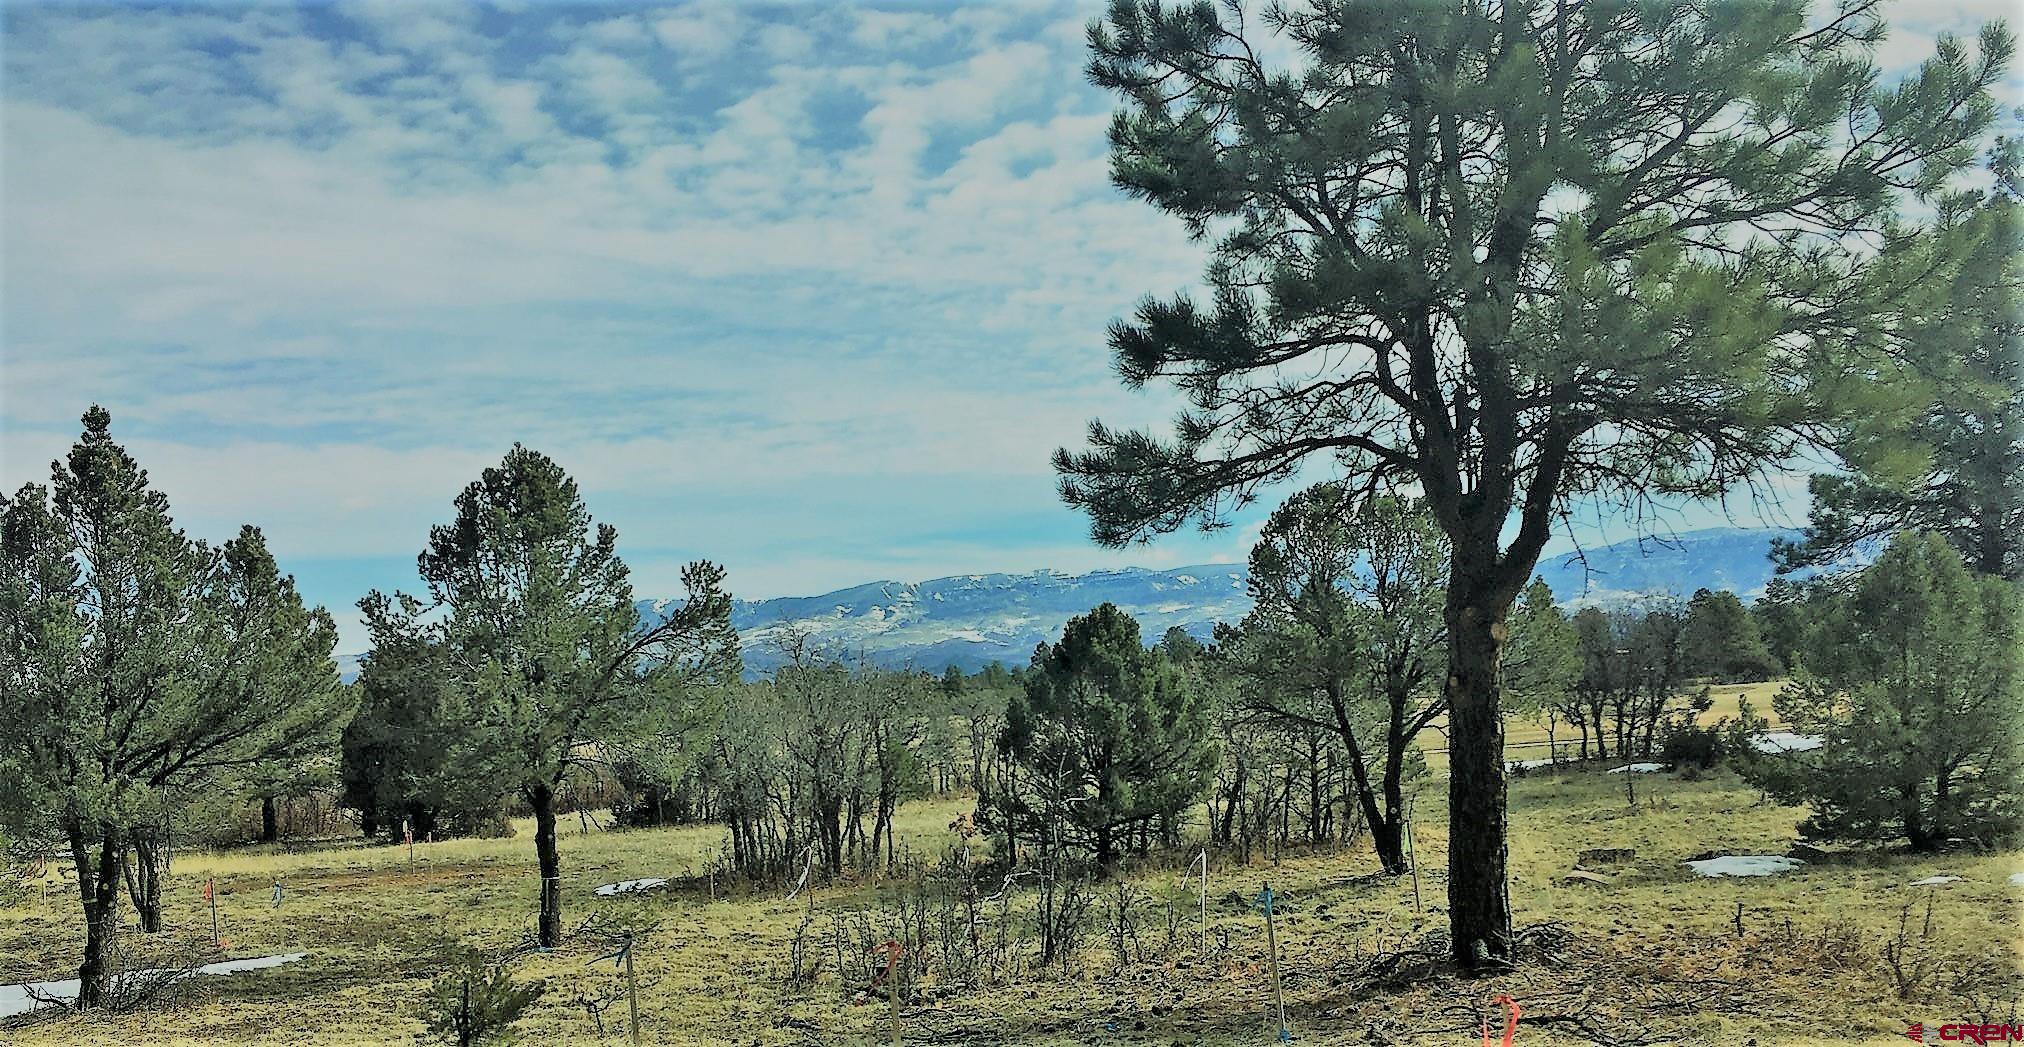 Beautiful level cluster lot at the tee on the first hole of the scenic Divide Ranch and Club.  Soaring ponderosa pines, gorgeous mountain views and golf course views. Large lot of 1.2 acres zoned multi-family allowing a build of 3 detached homes or a triplex. Owner financing available.  Ownership includes The Divide Ranch and Golf Club with its 7038 YD, 18 hole award winning golf course. The fabulous clubhouse is a short walk, so enjoy Friday Night Burger Night (see clubhouse schedule) and walk home. Located on Log Hill, just 6 miles from the historic town of Ridgway and 30 minutes from Montrose Regional Airport; 45 minutes from Telluride's world class skiing and 10 miles from Ouray's famous hot springs and the San Juan Skyway. Owner financing available.